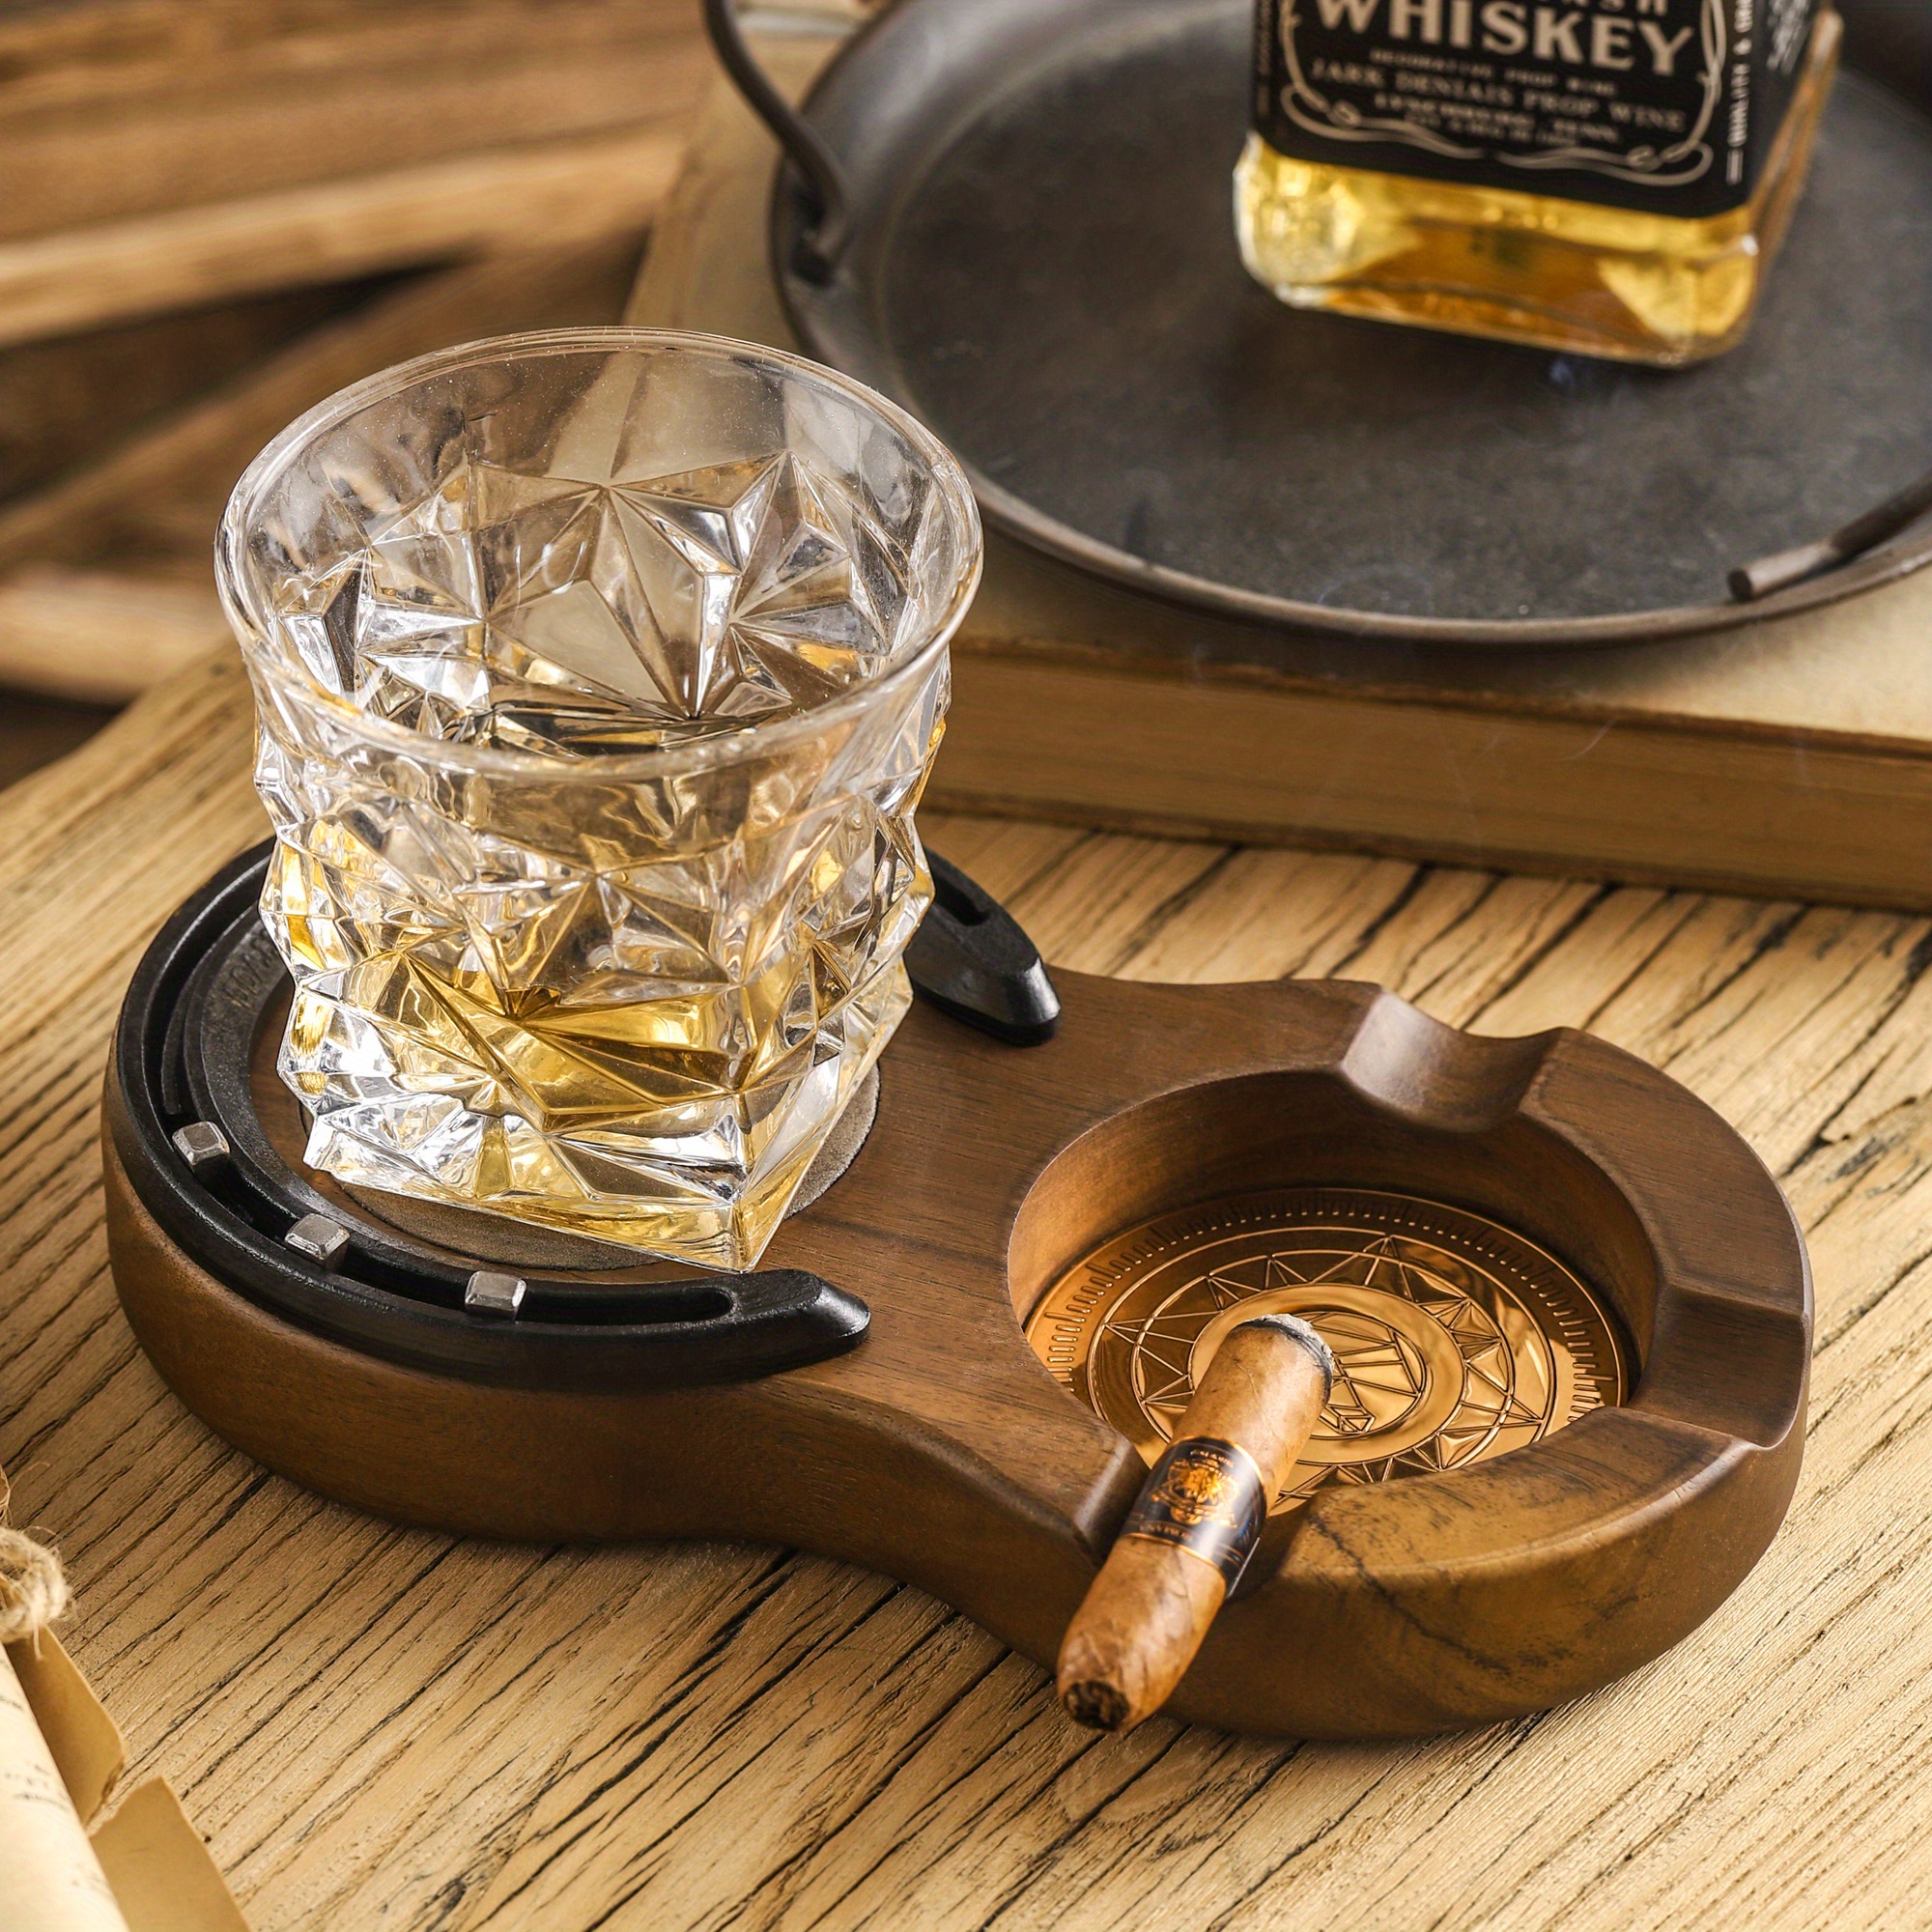 1pc wooden cigar ashtray handmade horseshoe design cigar accessories with 3 cigar slot portable travel cigar gifts for men indoor outdoor patio home office use details 8